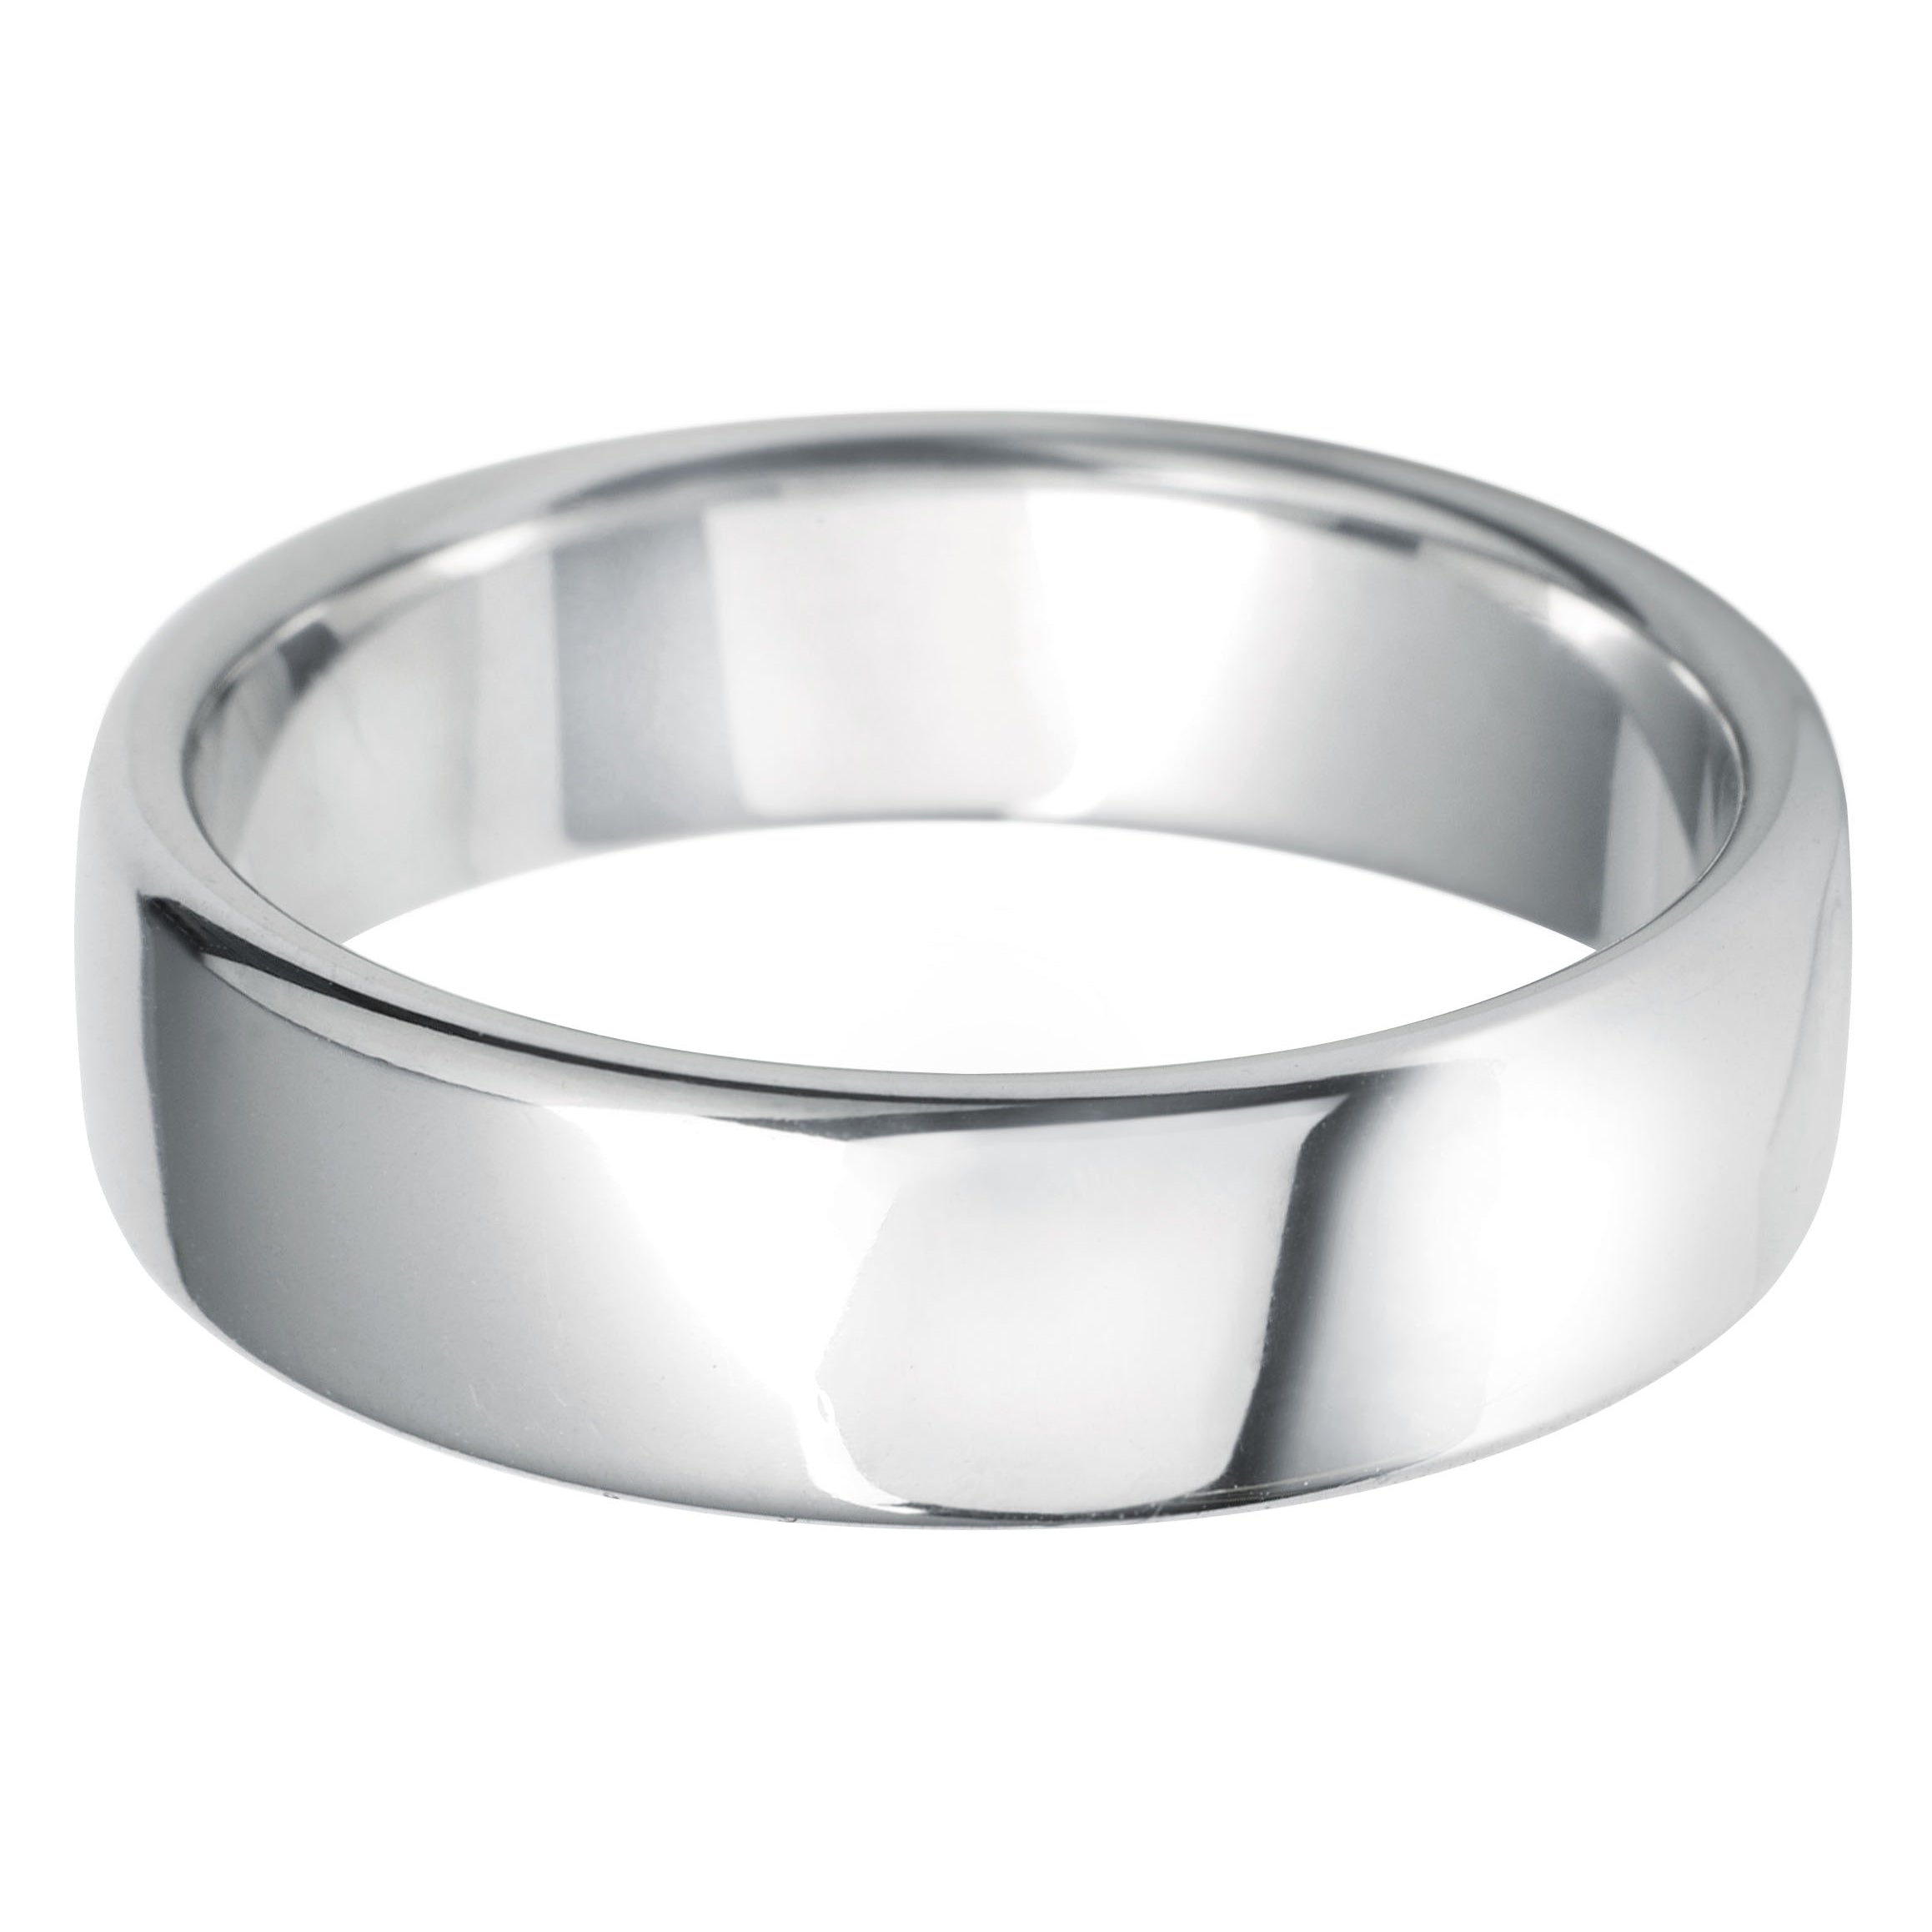 8mm Rounded Flat lightweight Wedding Ring